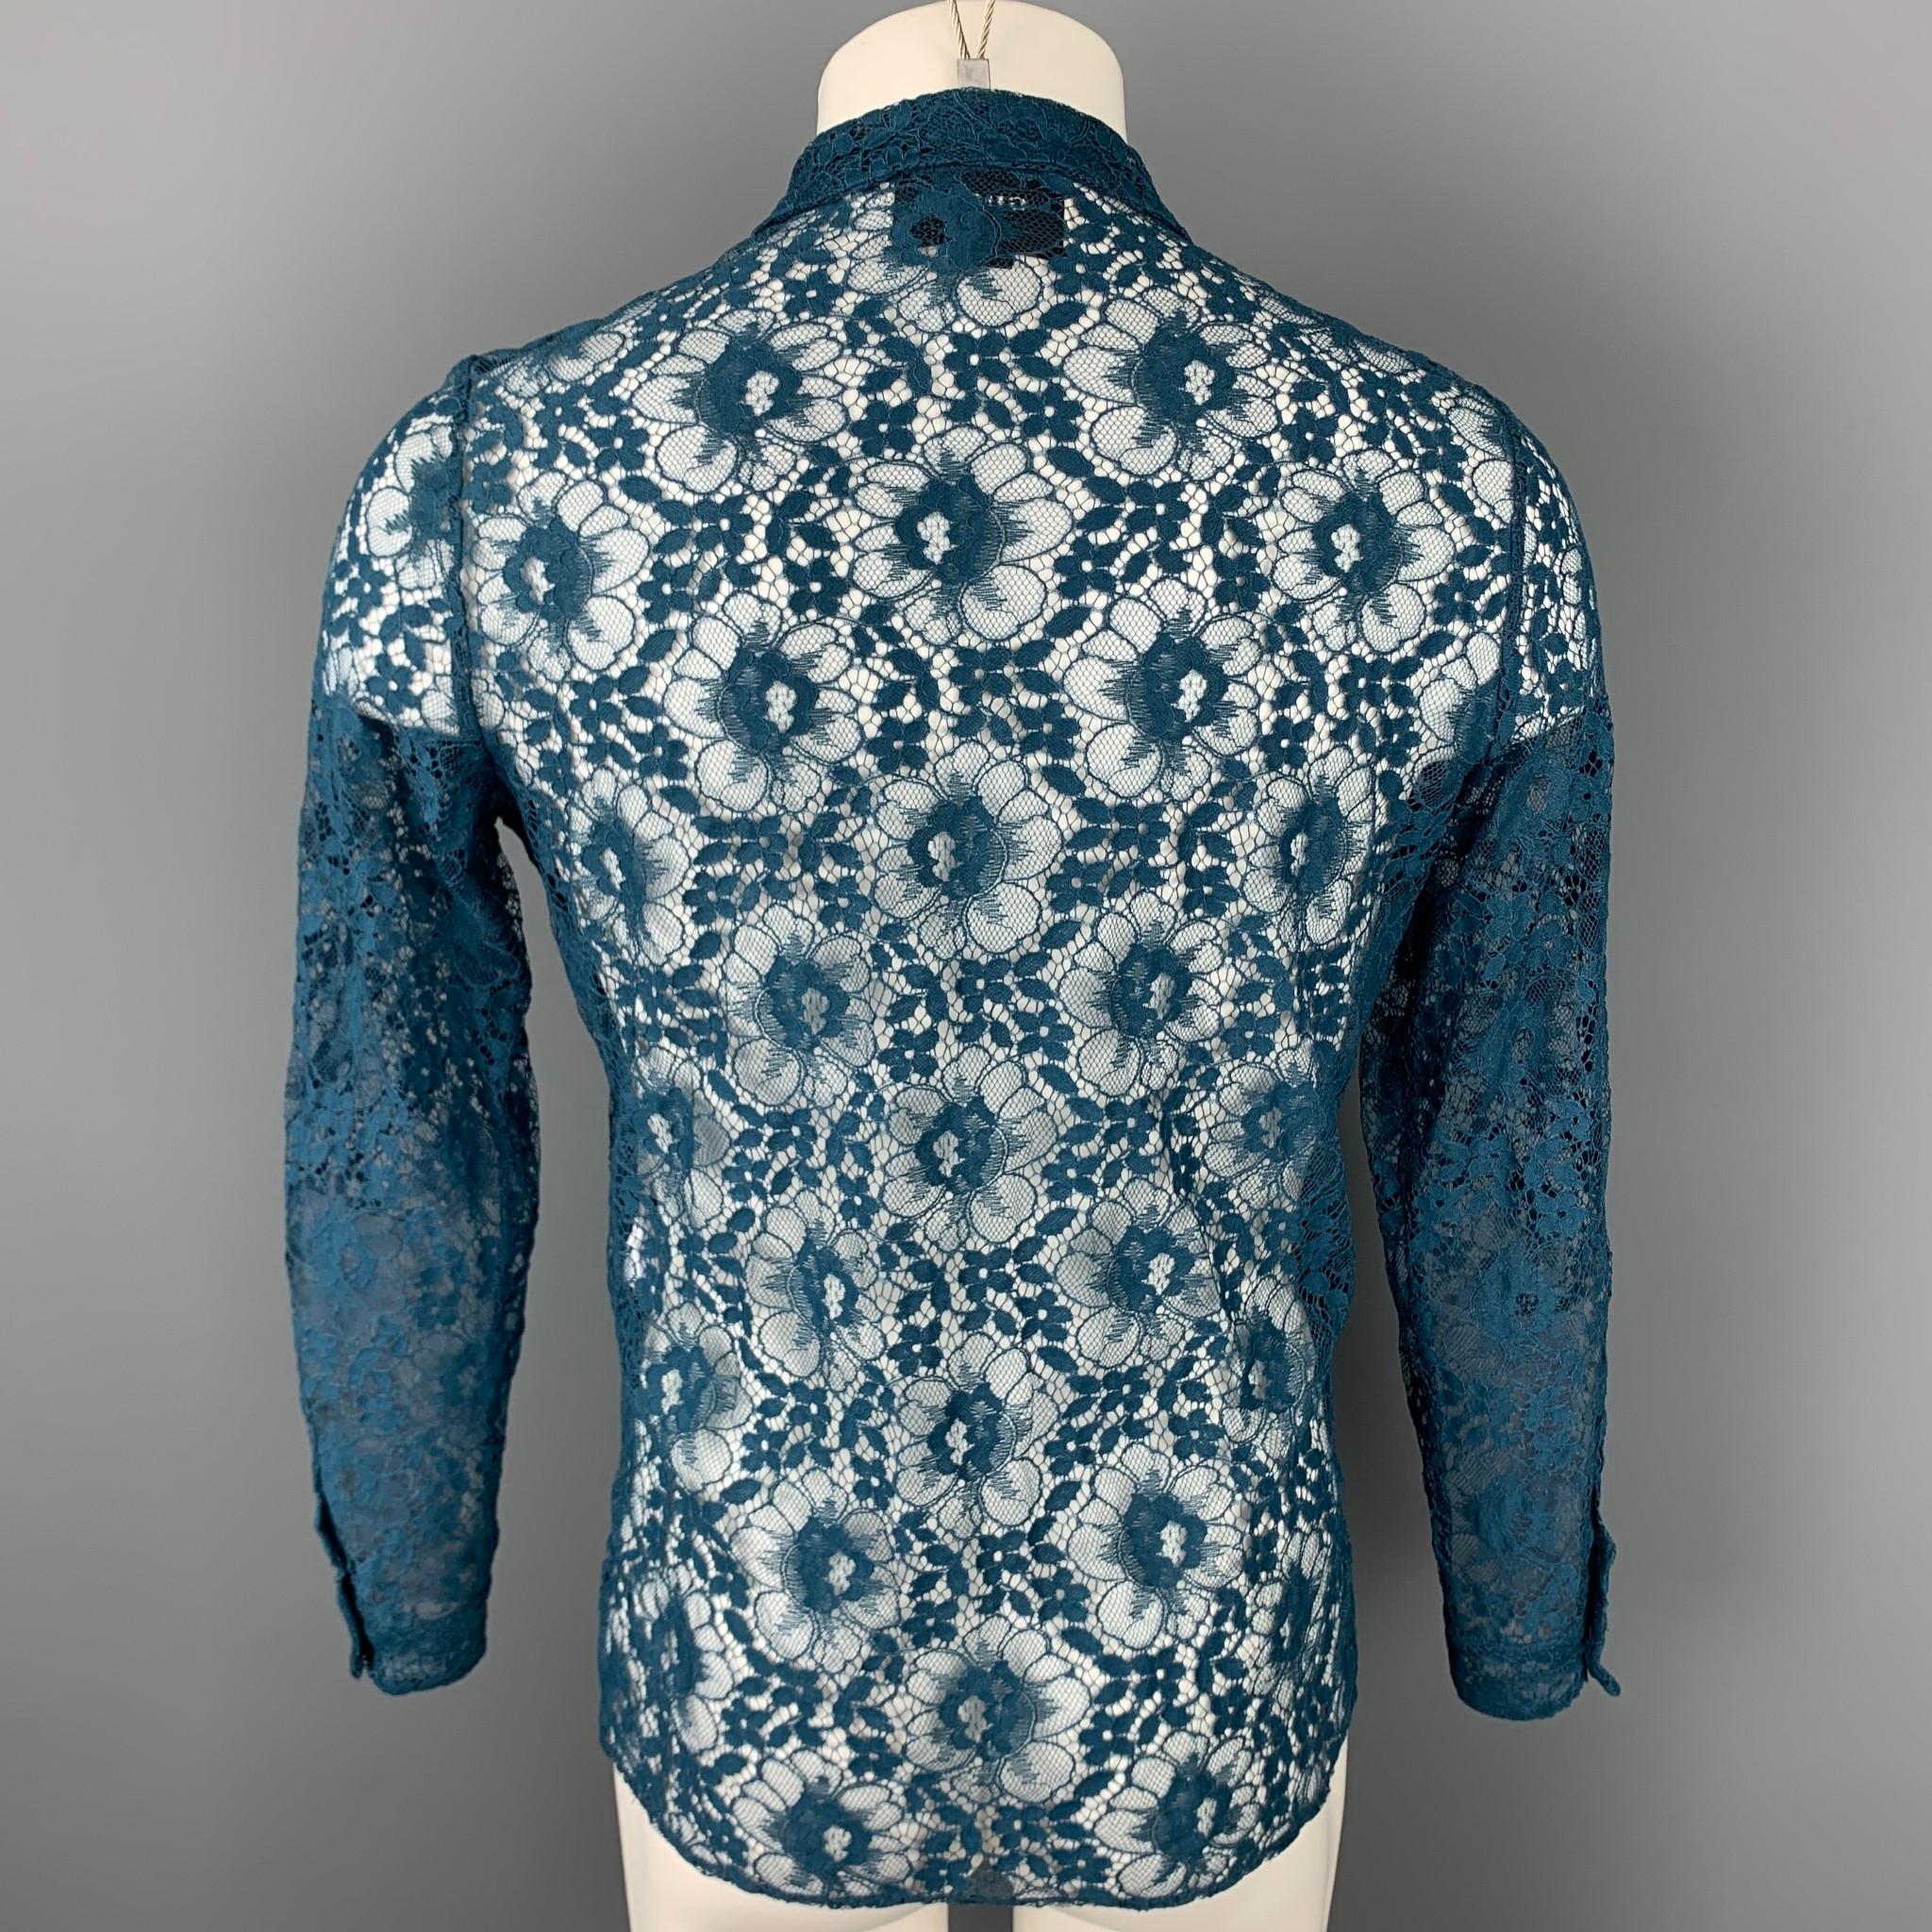 Blue GUCCI S/S 16 Size S Teal Sheer Lace Embroidery Polyamide Blend Long Sleeve Shirt